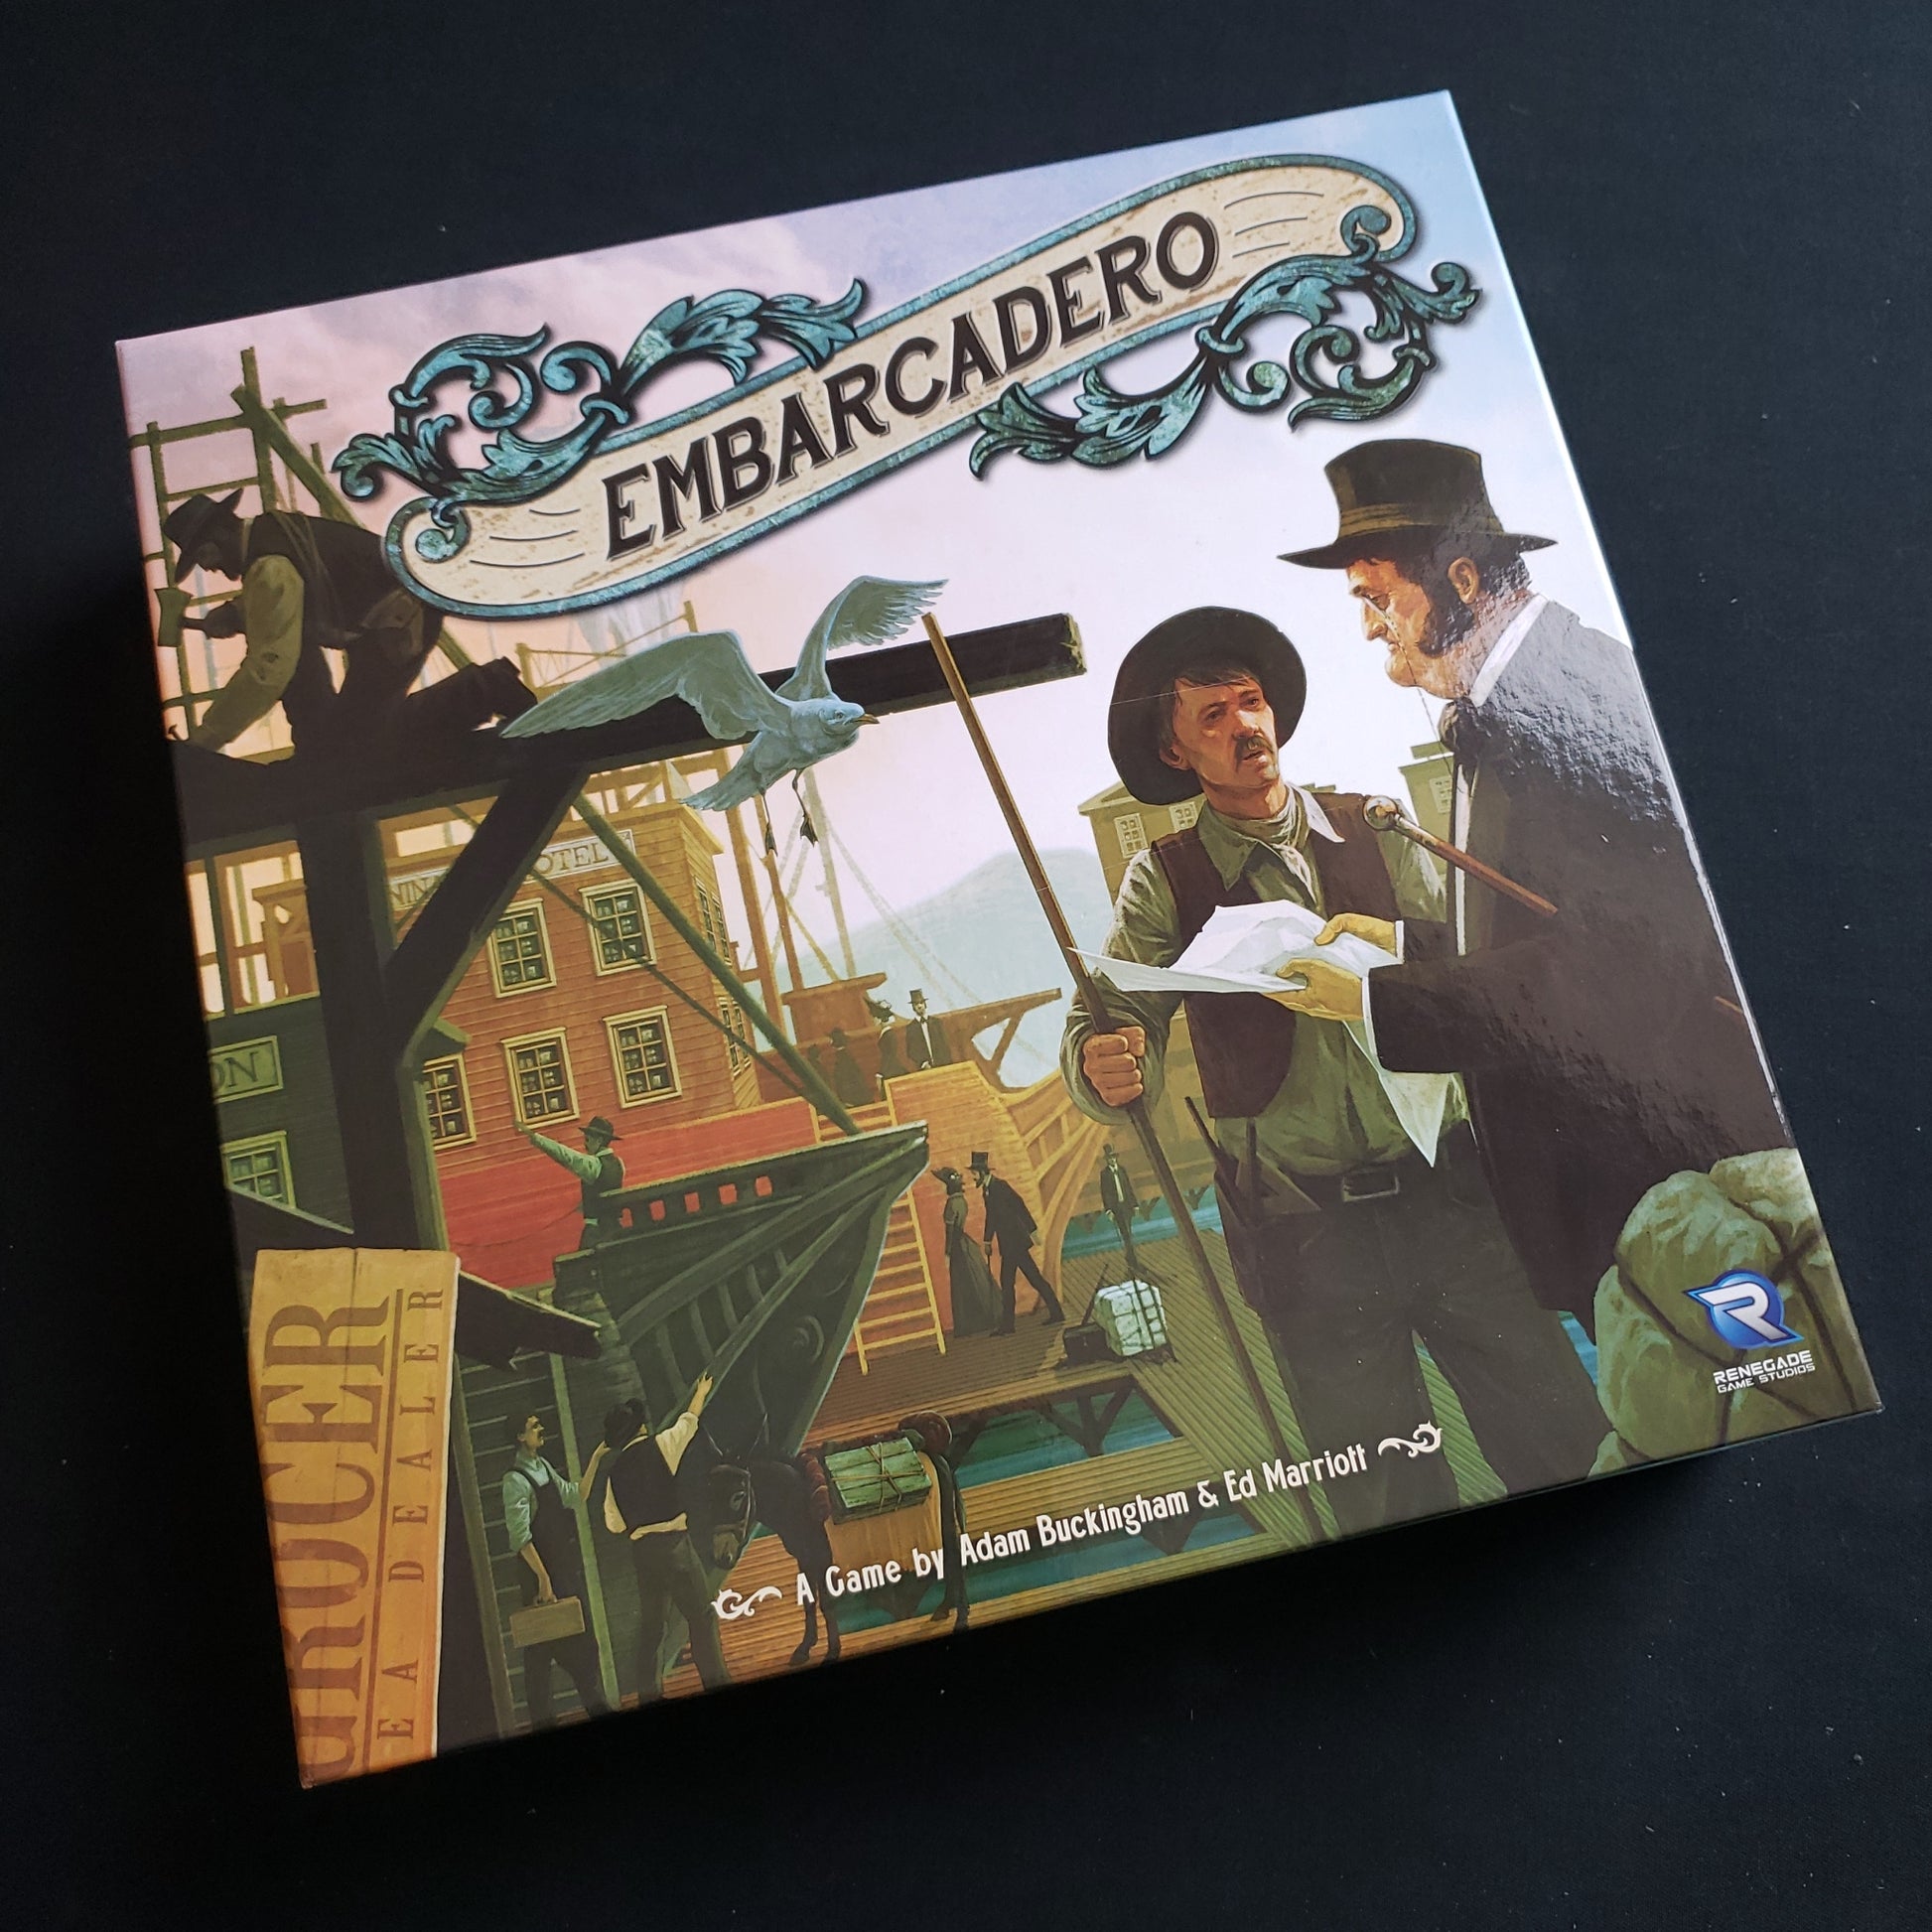 Image shows the front cover of the box of the Embarcadero board game